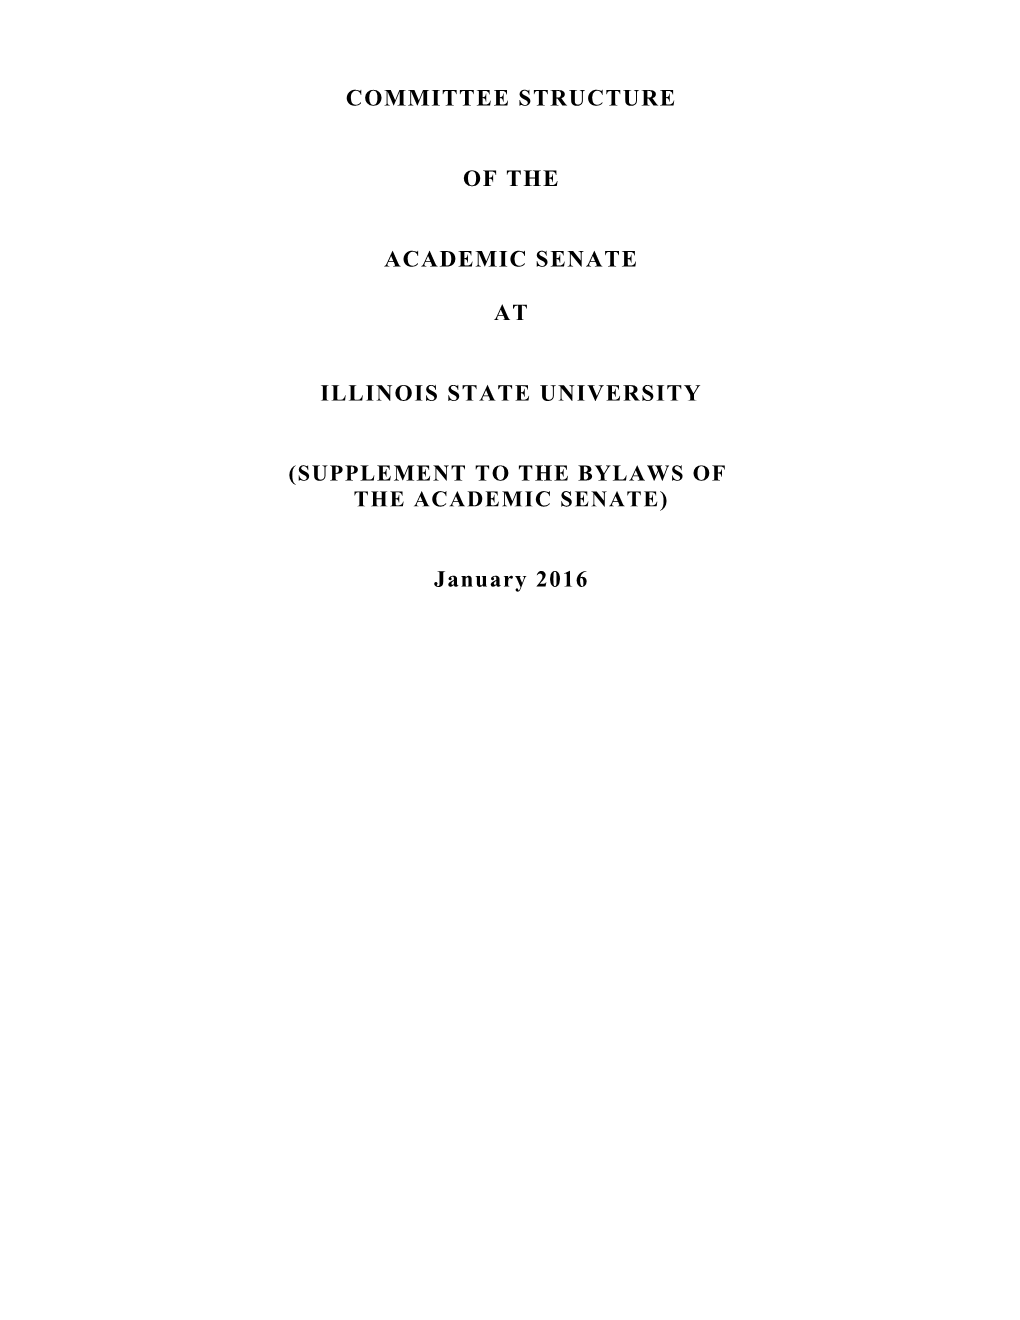 The Academic Senate Is the Primary Governing Body at Illinois State University and Provides